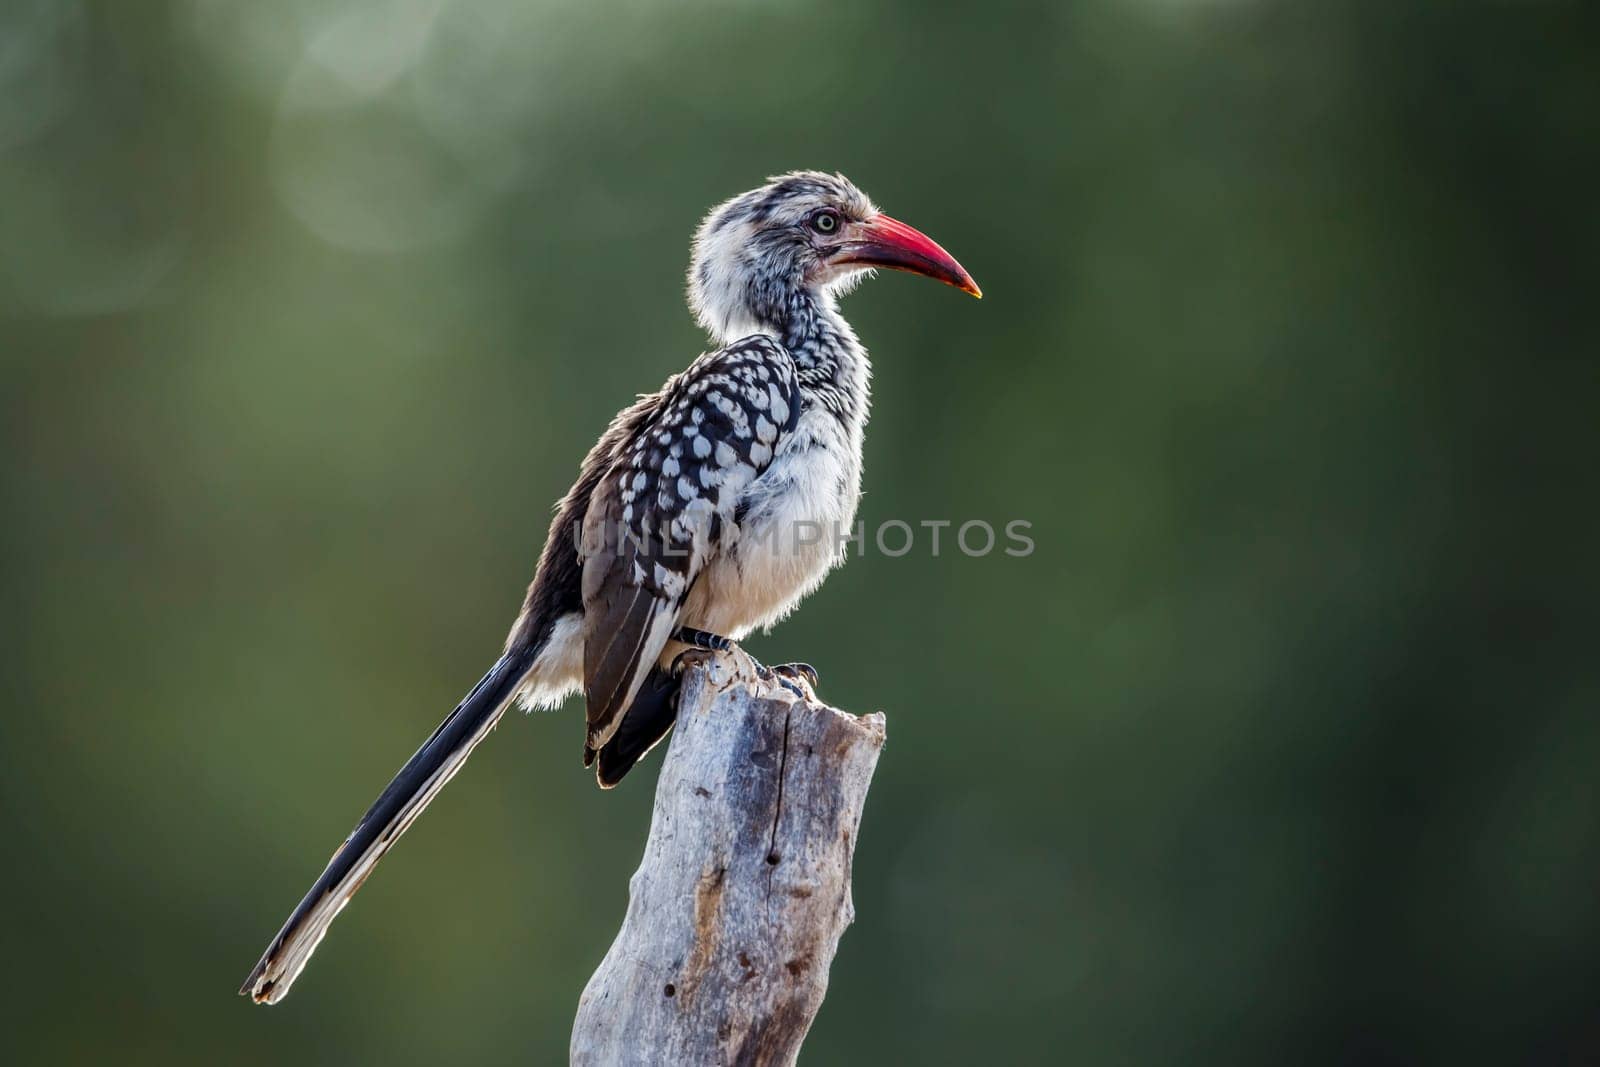 Southern Red billed Hornbill standing on a log in backlit in Kruger National park, South Africa ; Specie Tockus rufirostris family of Bucerotidae